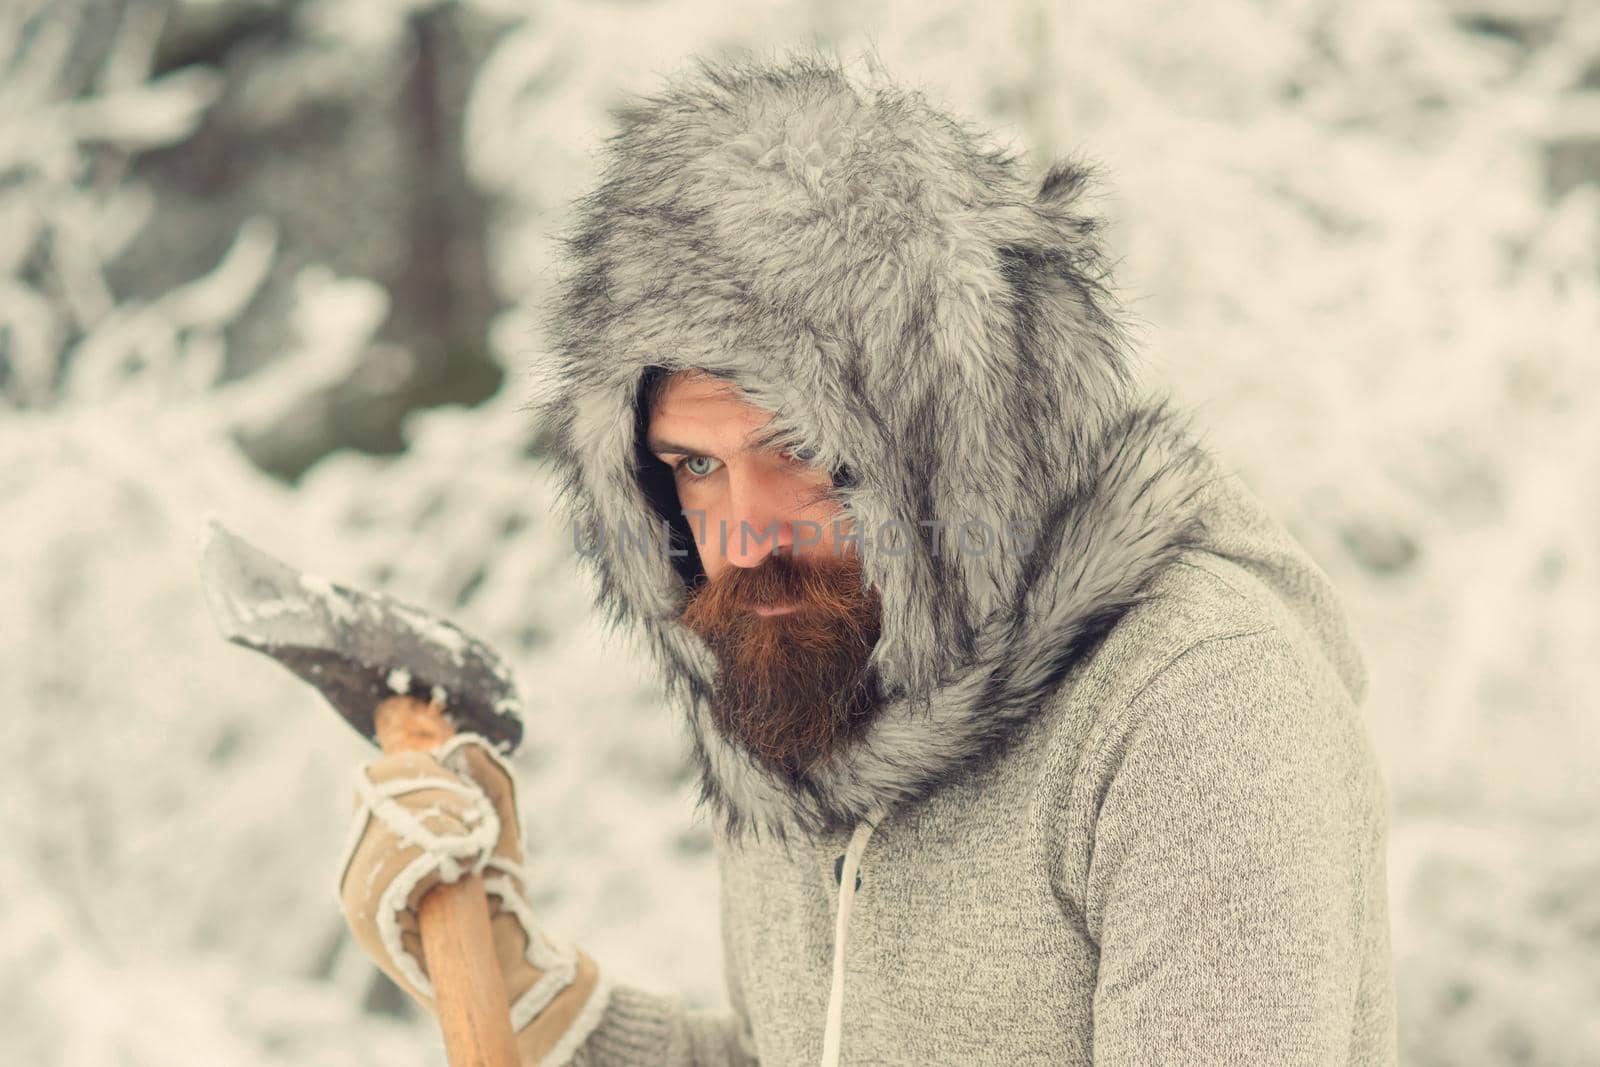 Man lumberjack with axe. Bearded man with axe in snowy forest. Angry face closeup. by Tverdokhlib